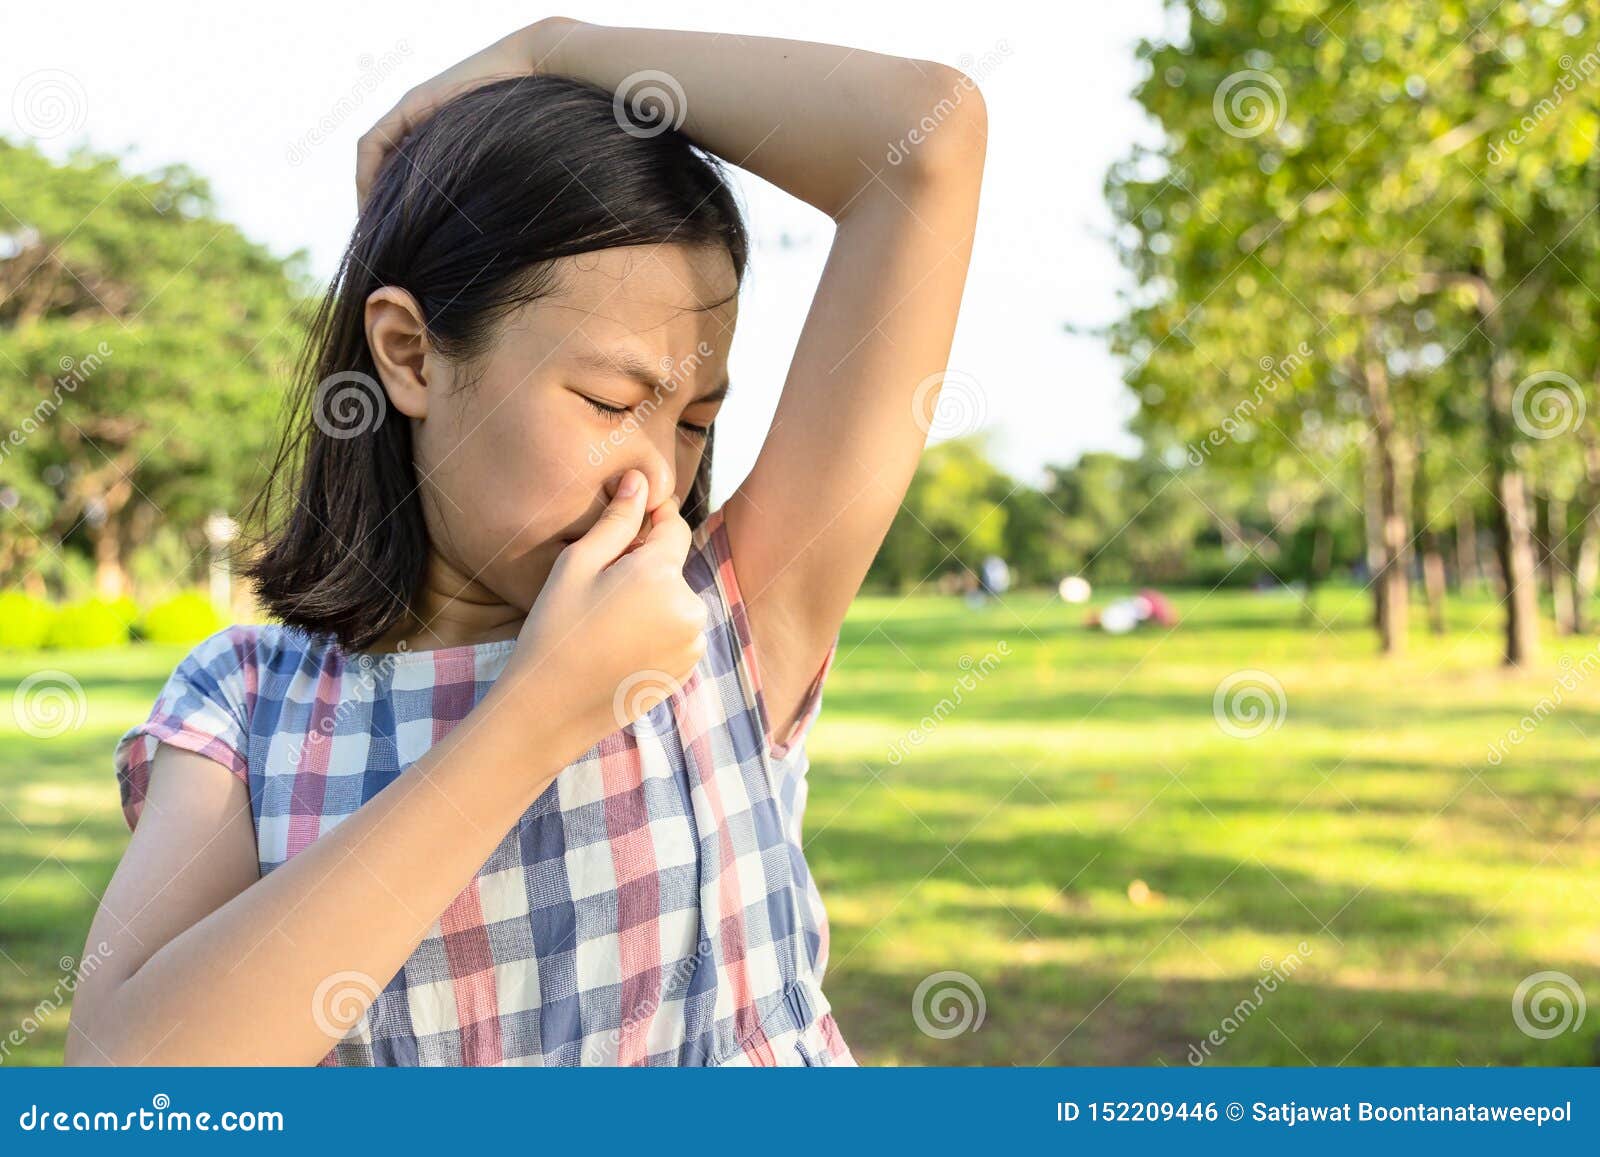 Closeup Asian Cute Little Girl Feel Bad Foul Odor  Situation,smelling,sniffing Her Wet Armpit in Outdoor Park,beautiful Child  Stock Photo - Image of hormonal, hand: 152209446